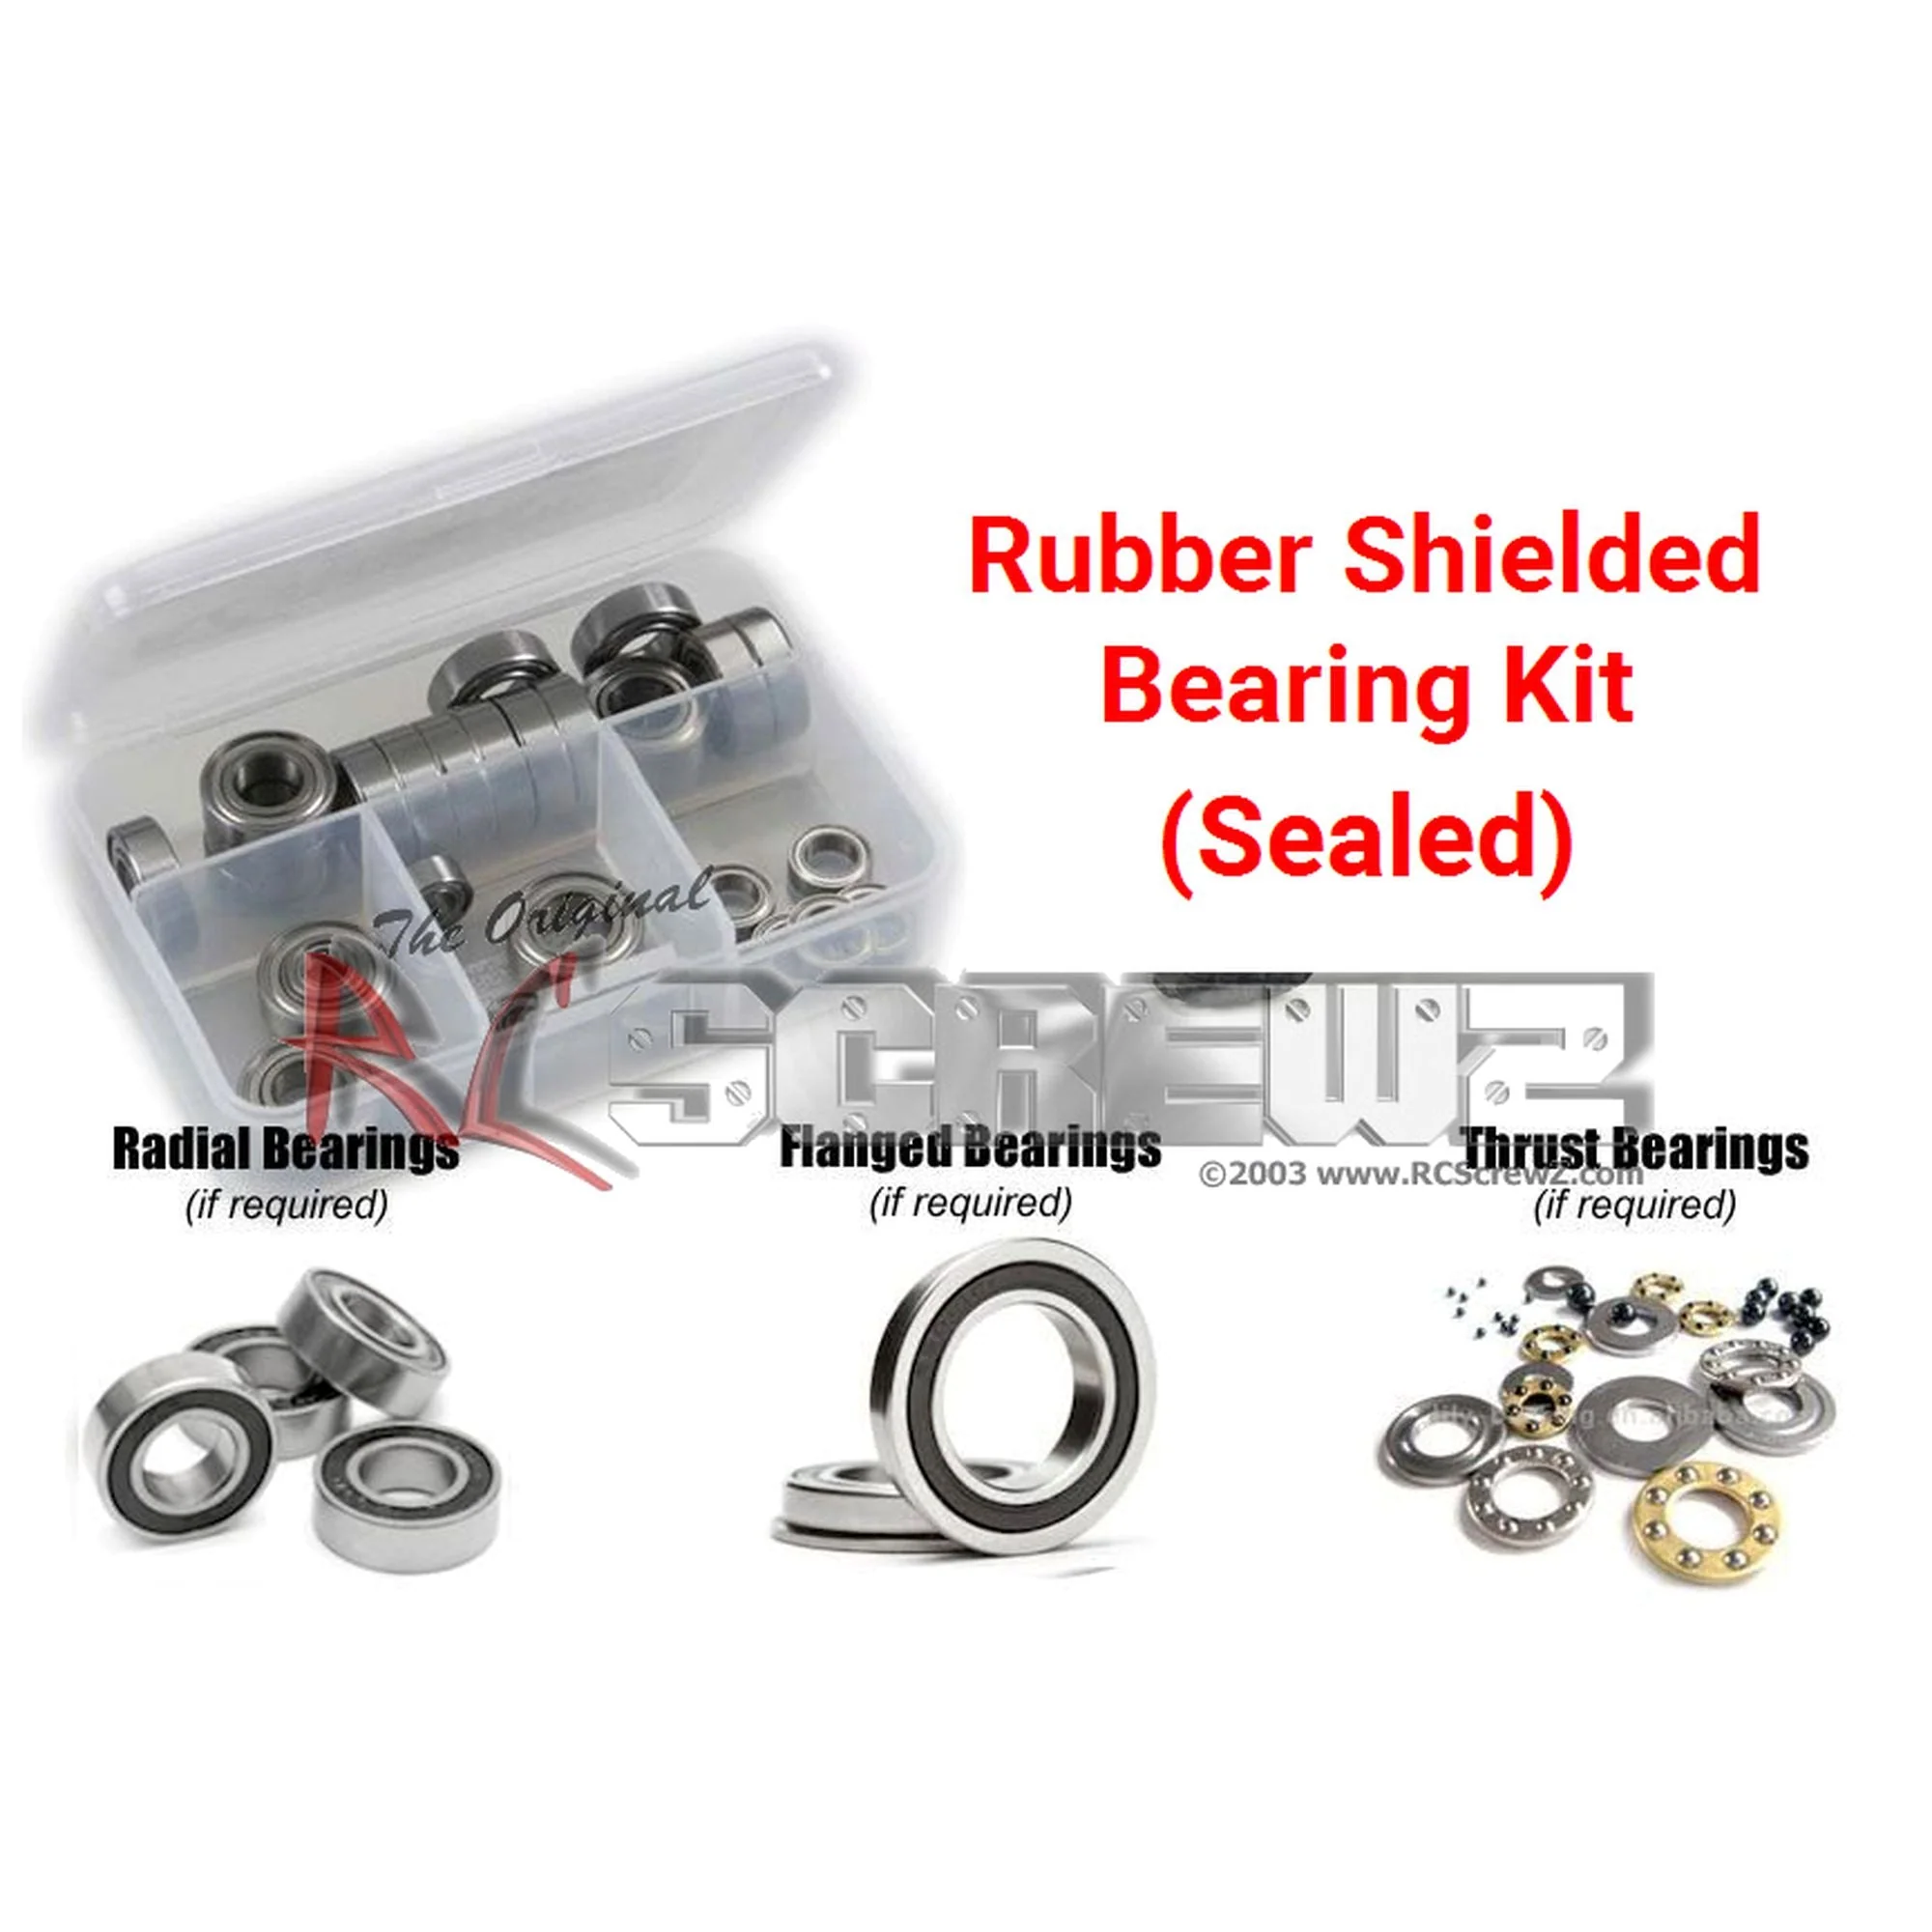 RCScrewZ Rubber Shielded Bearing Kit tam105r for Tamiya Nitrage 5.2 #43542 - Picture 1 of 12